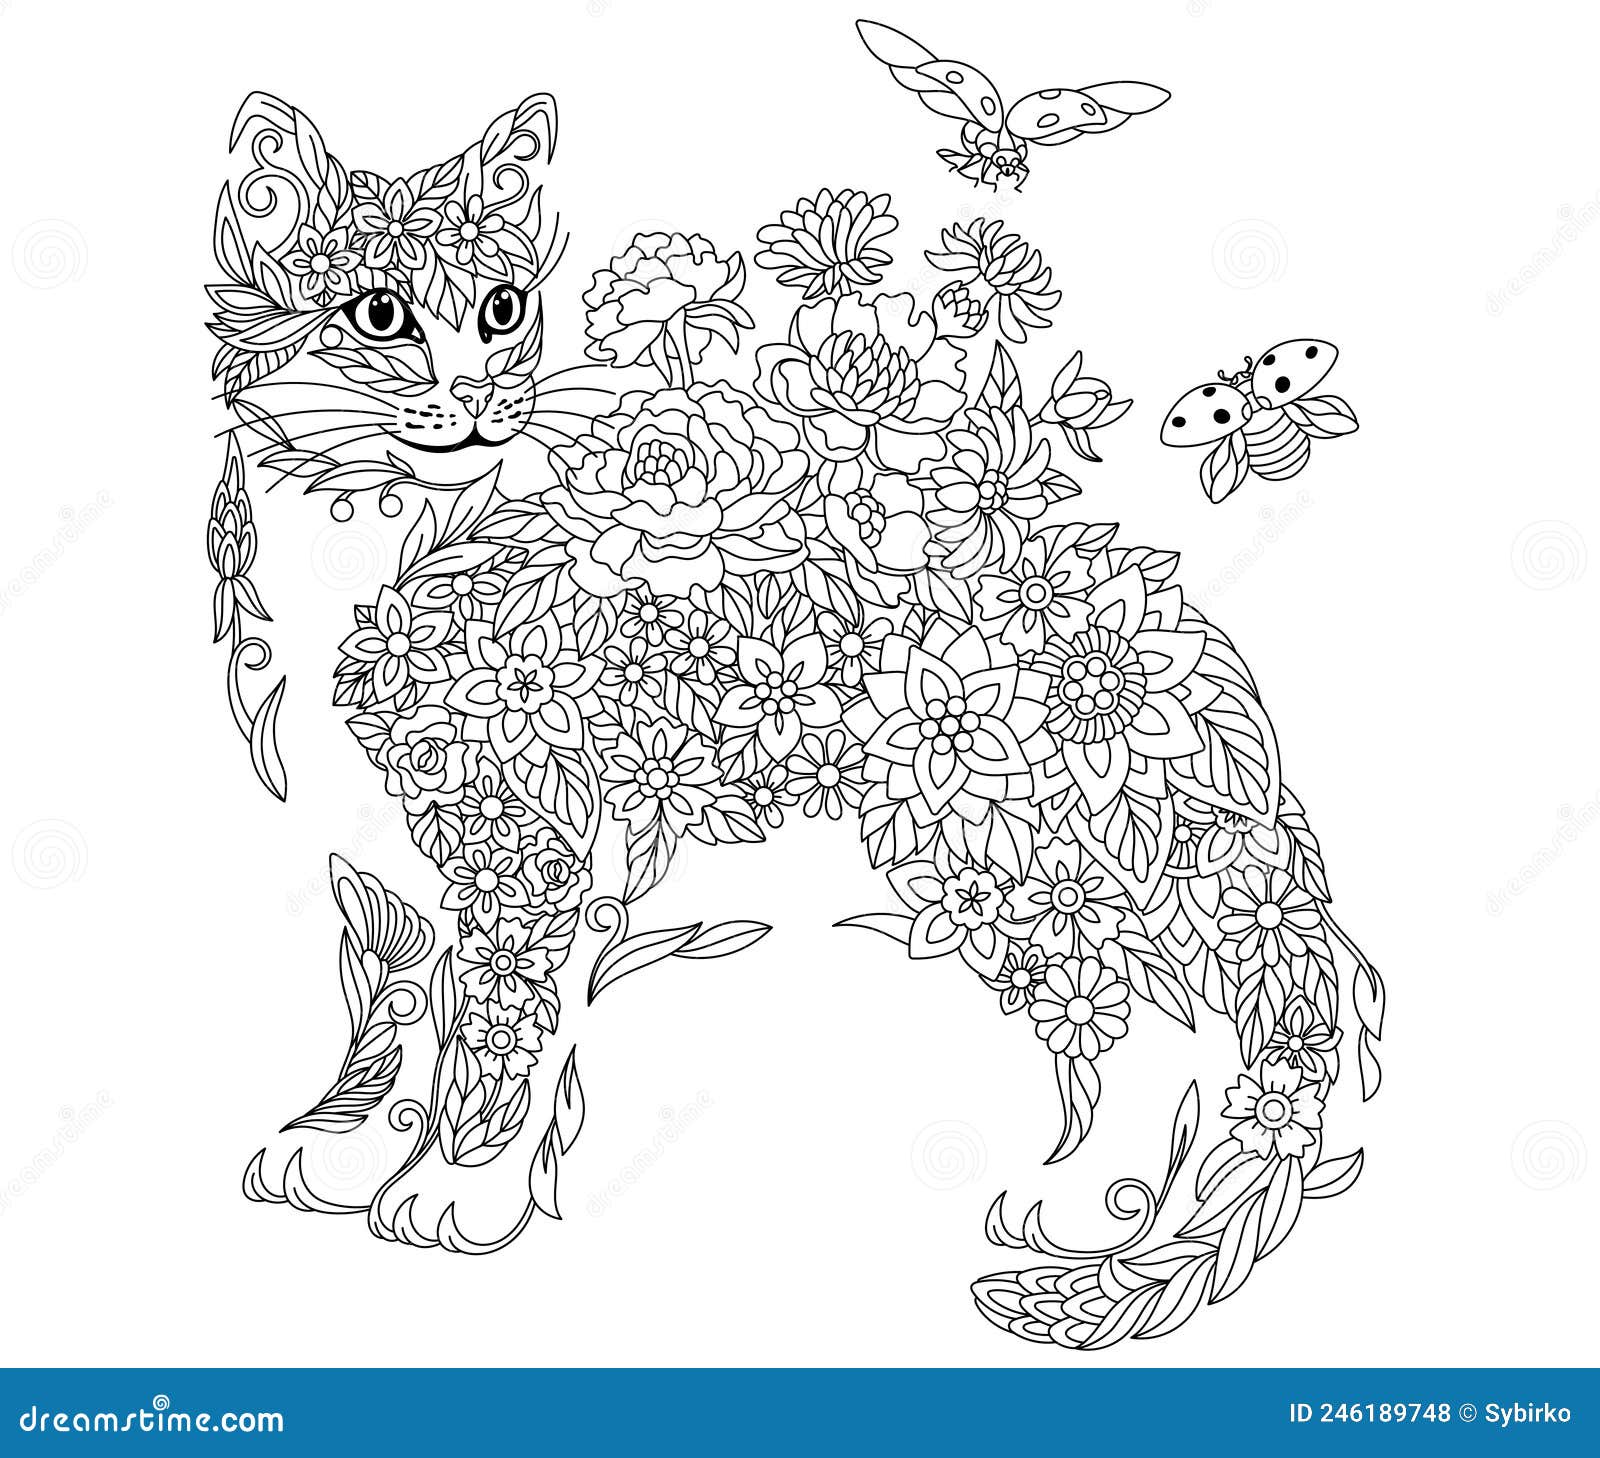 Cats Dogs Illustration Coloring Book Stock Vector (Royalty Free